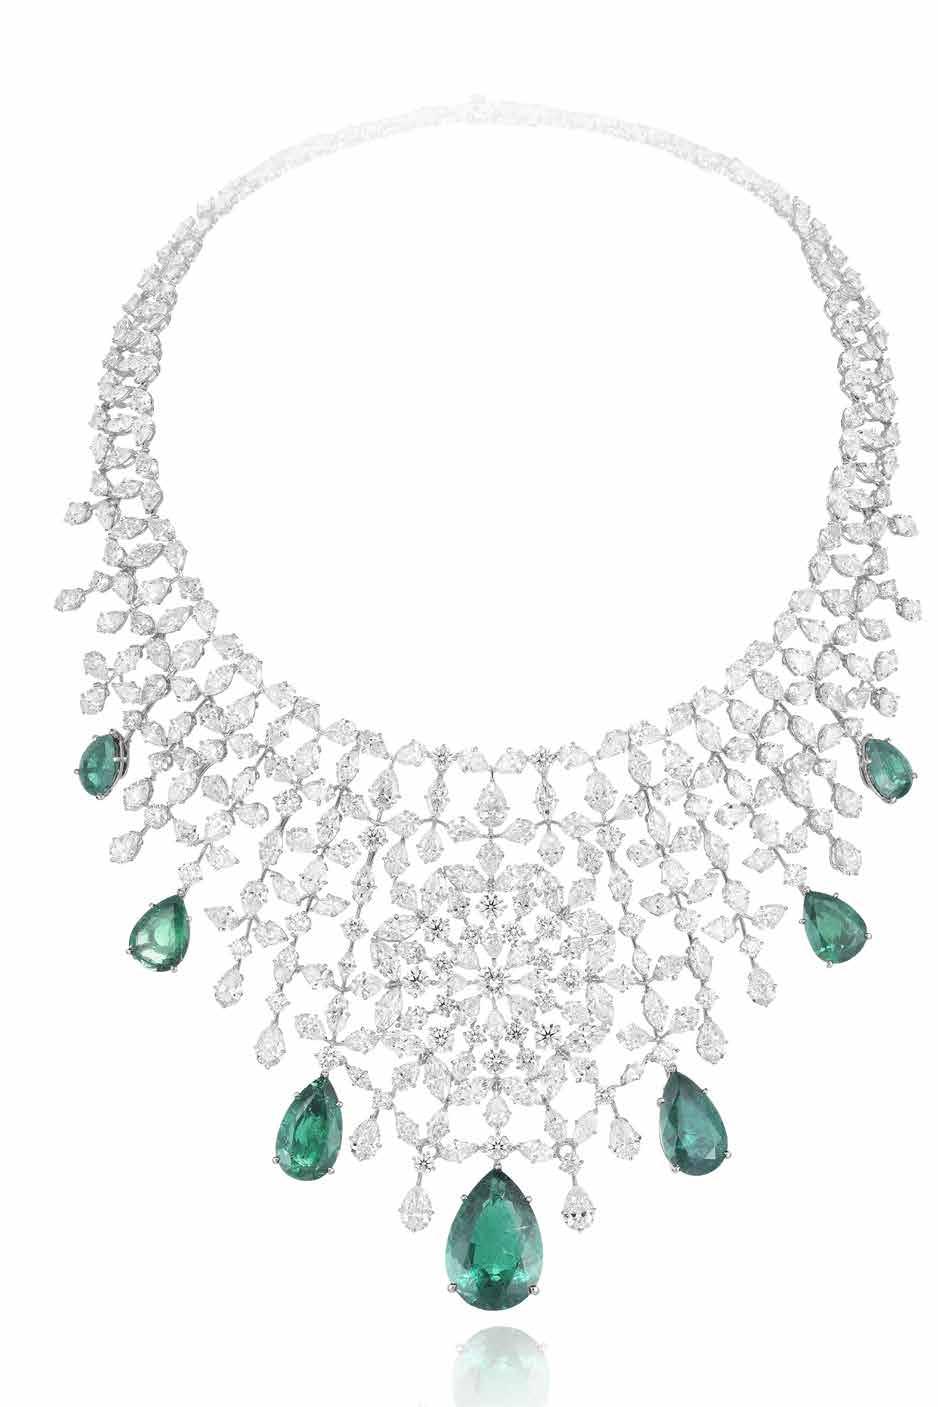 7-carat pearshaped central Zambian emerald and six other pear-shaped Zambian emeralds for a total of